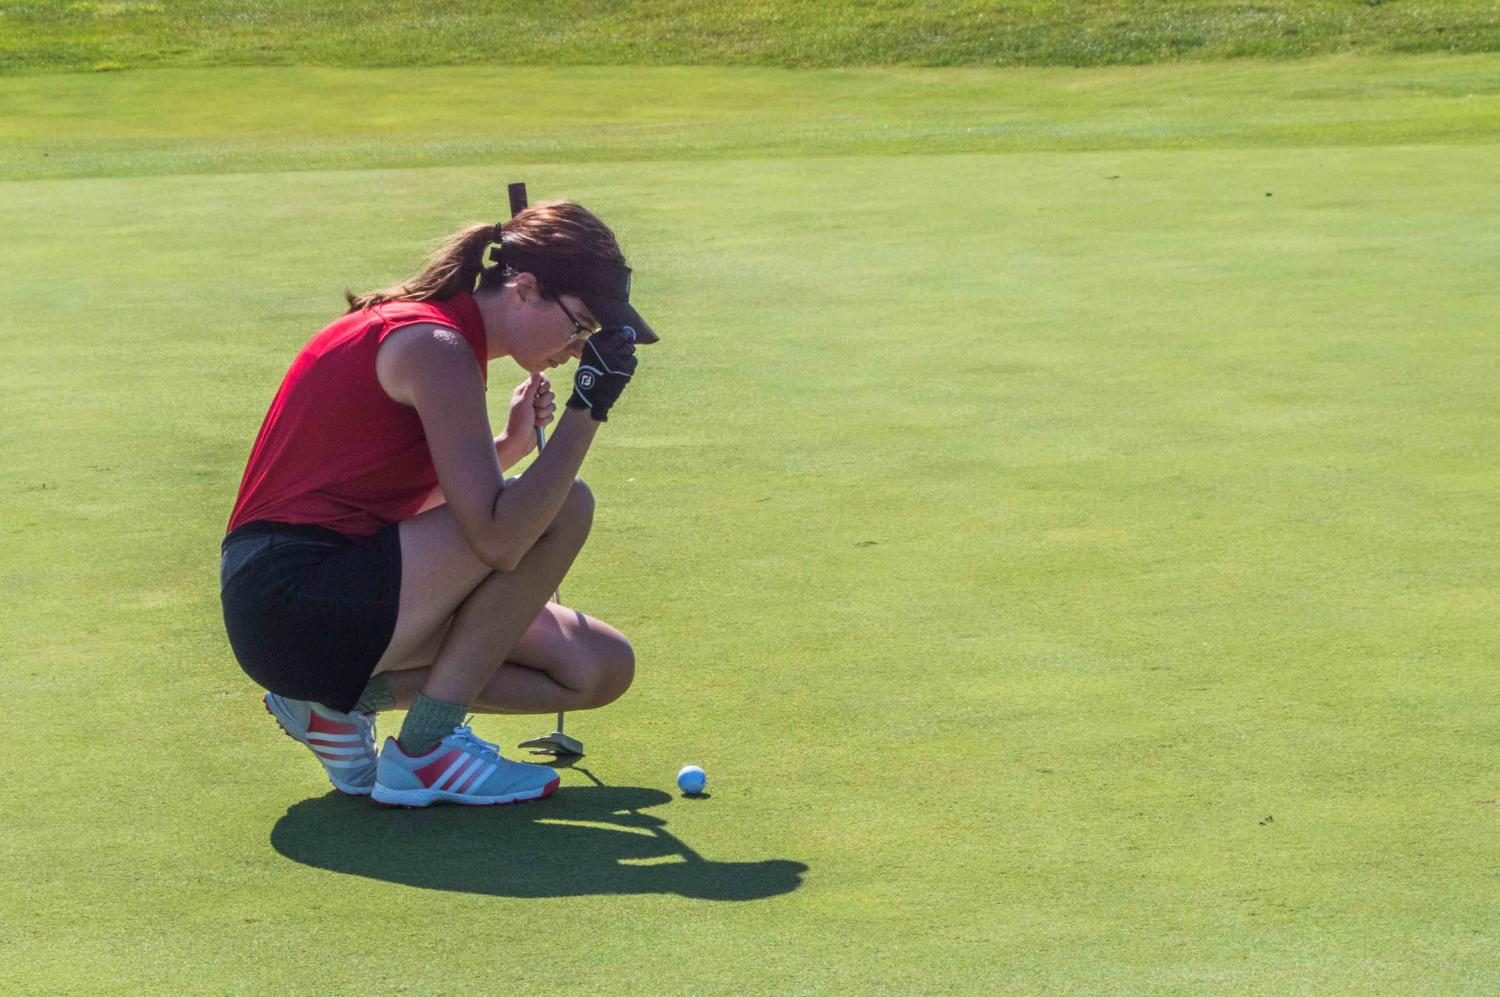 Senior+Sophia+Craig+marks+her+ball+before+putting+at+Southern+Dunes+on+Wednesday%2C+Aug.+9.+The+golf+team+played+Franklin+Community+High+School+and+lost.+